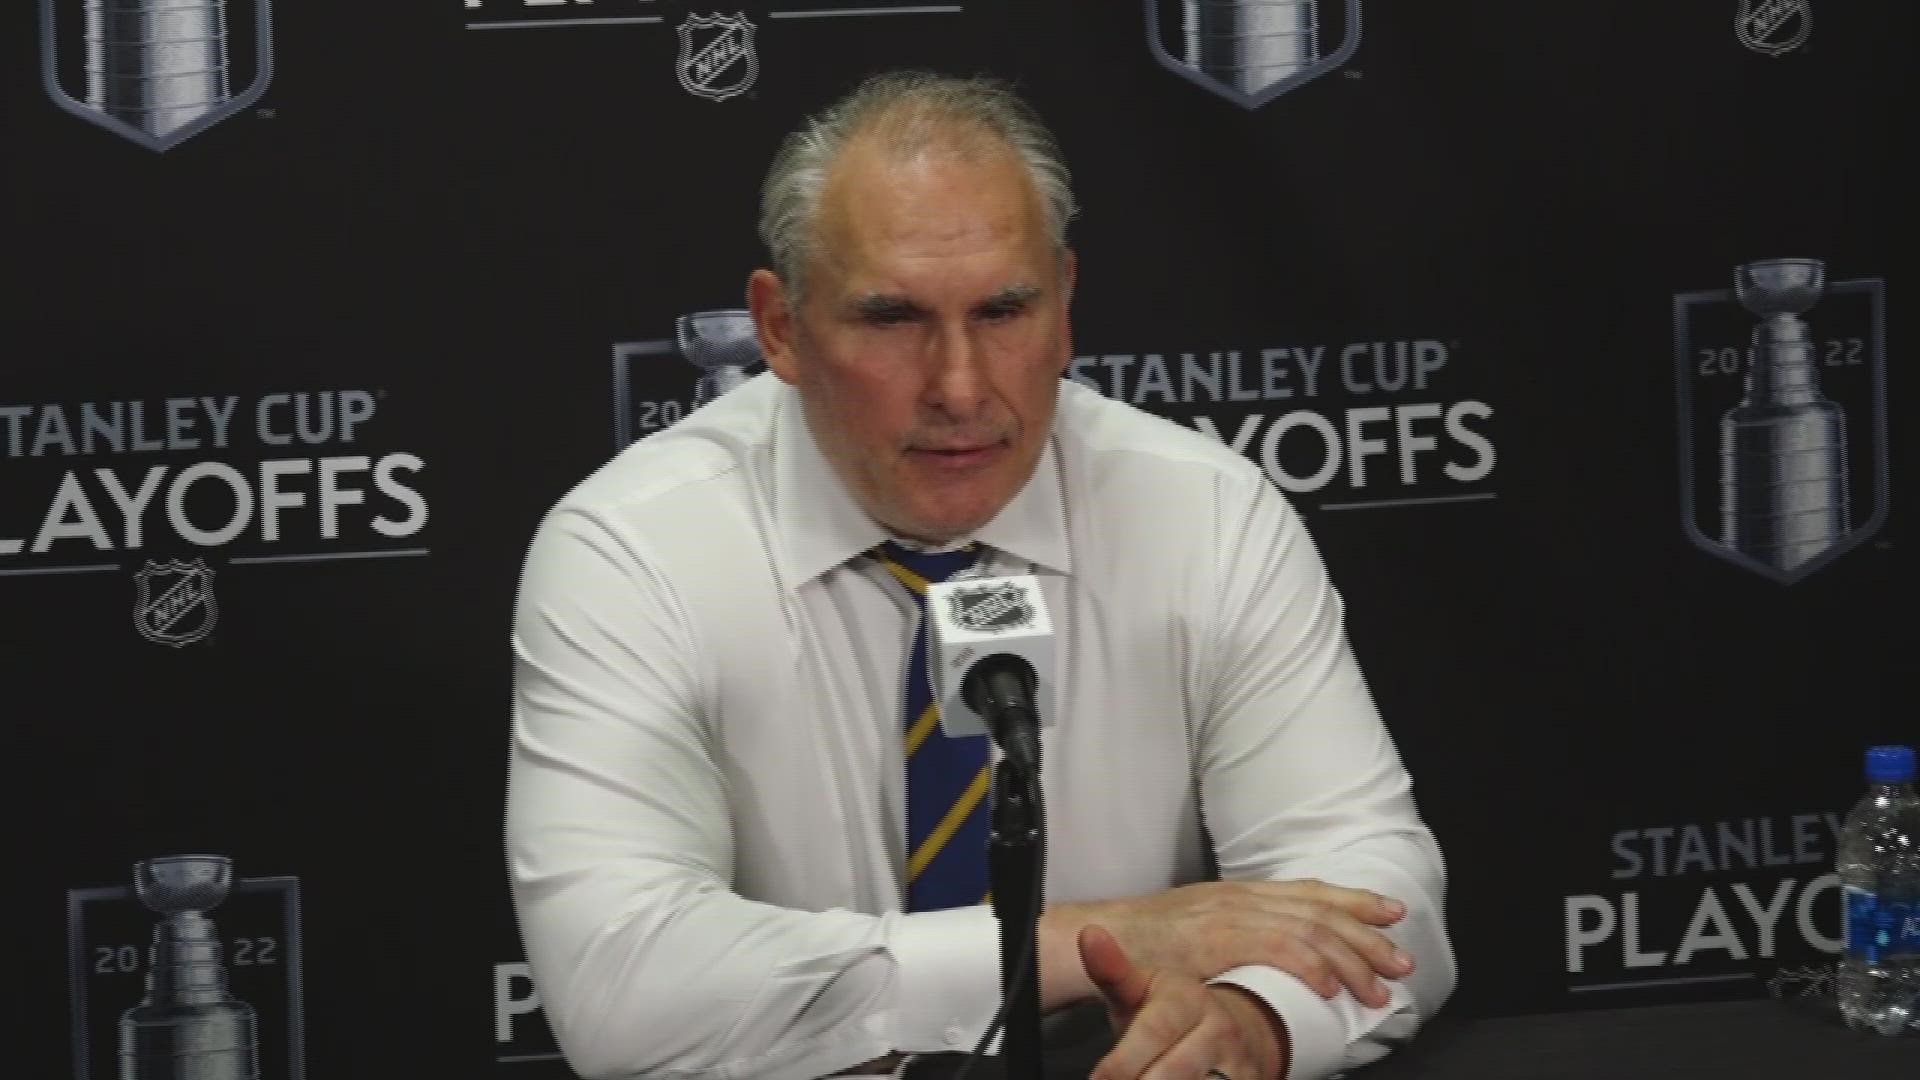 St. Louis Blues Coach Craig Berube discusses the team's overtime loss to the Colorado Avalanche in Game 1 of Round 2 of the Stanley Cup Playoffs.